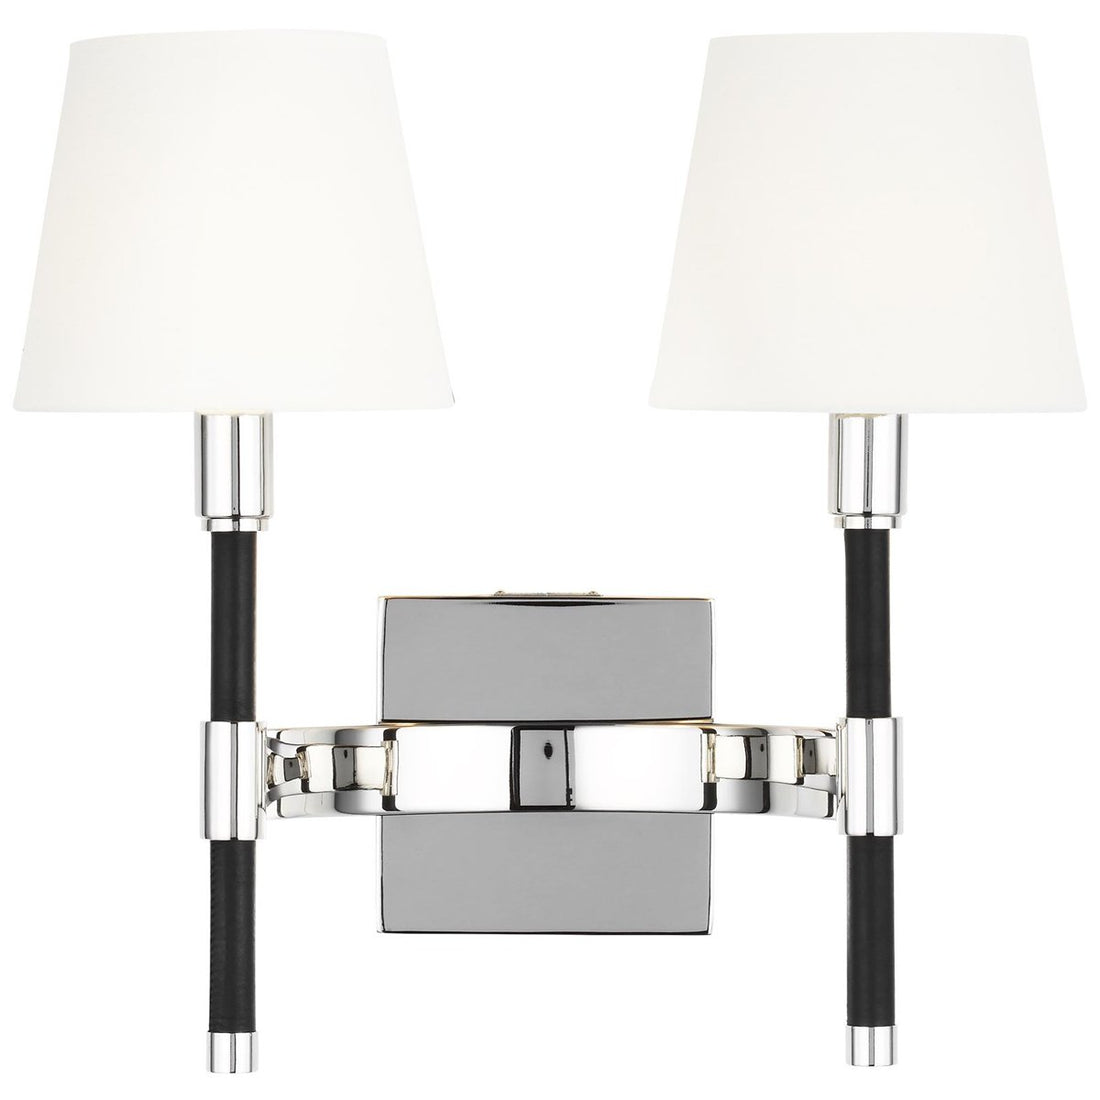 Feiss Katie Double Sconce